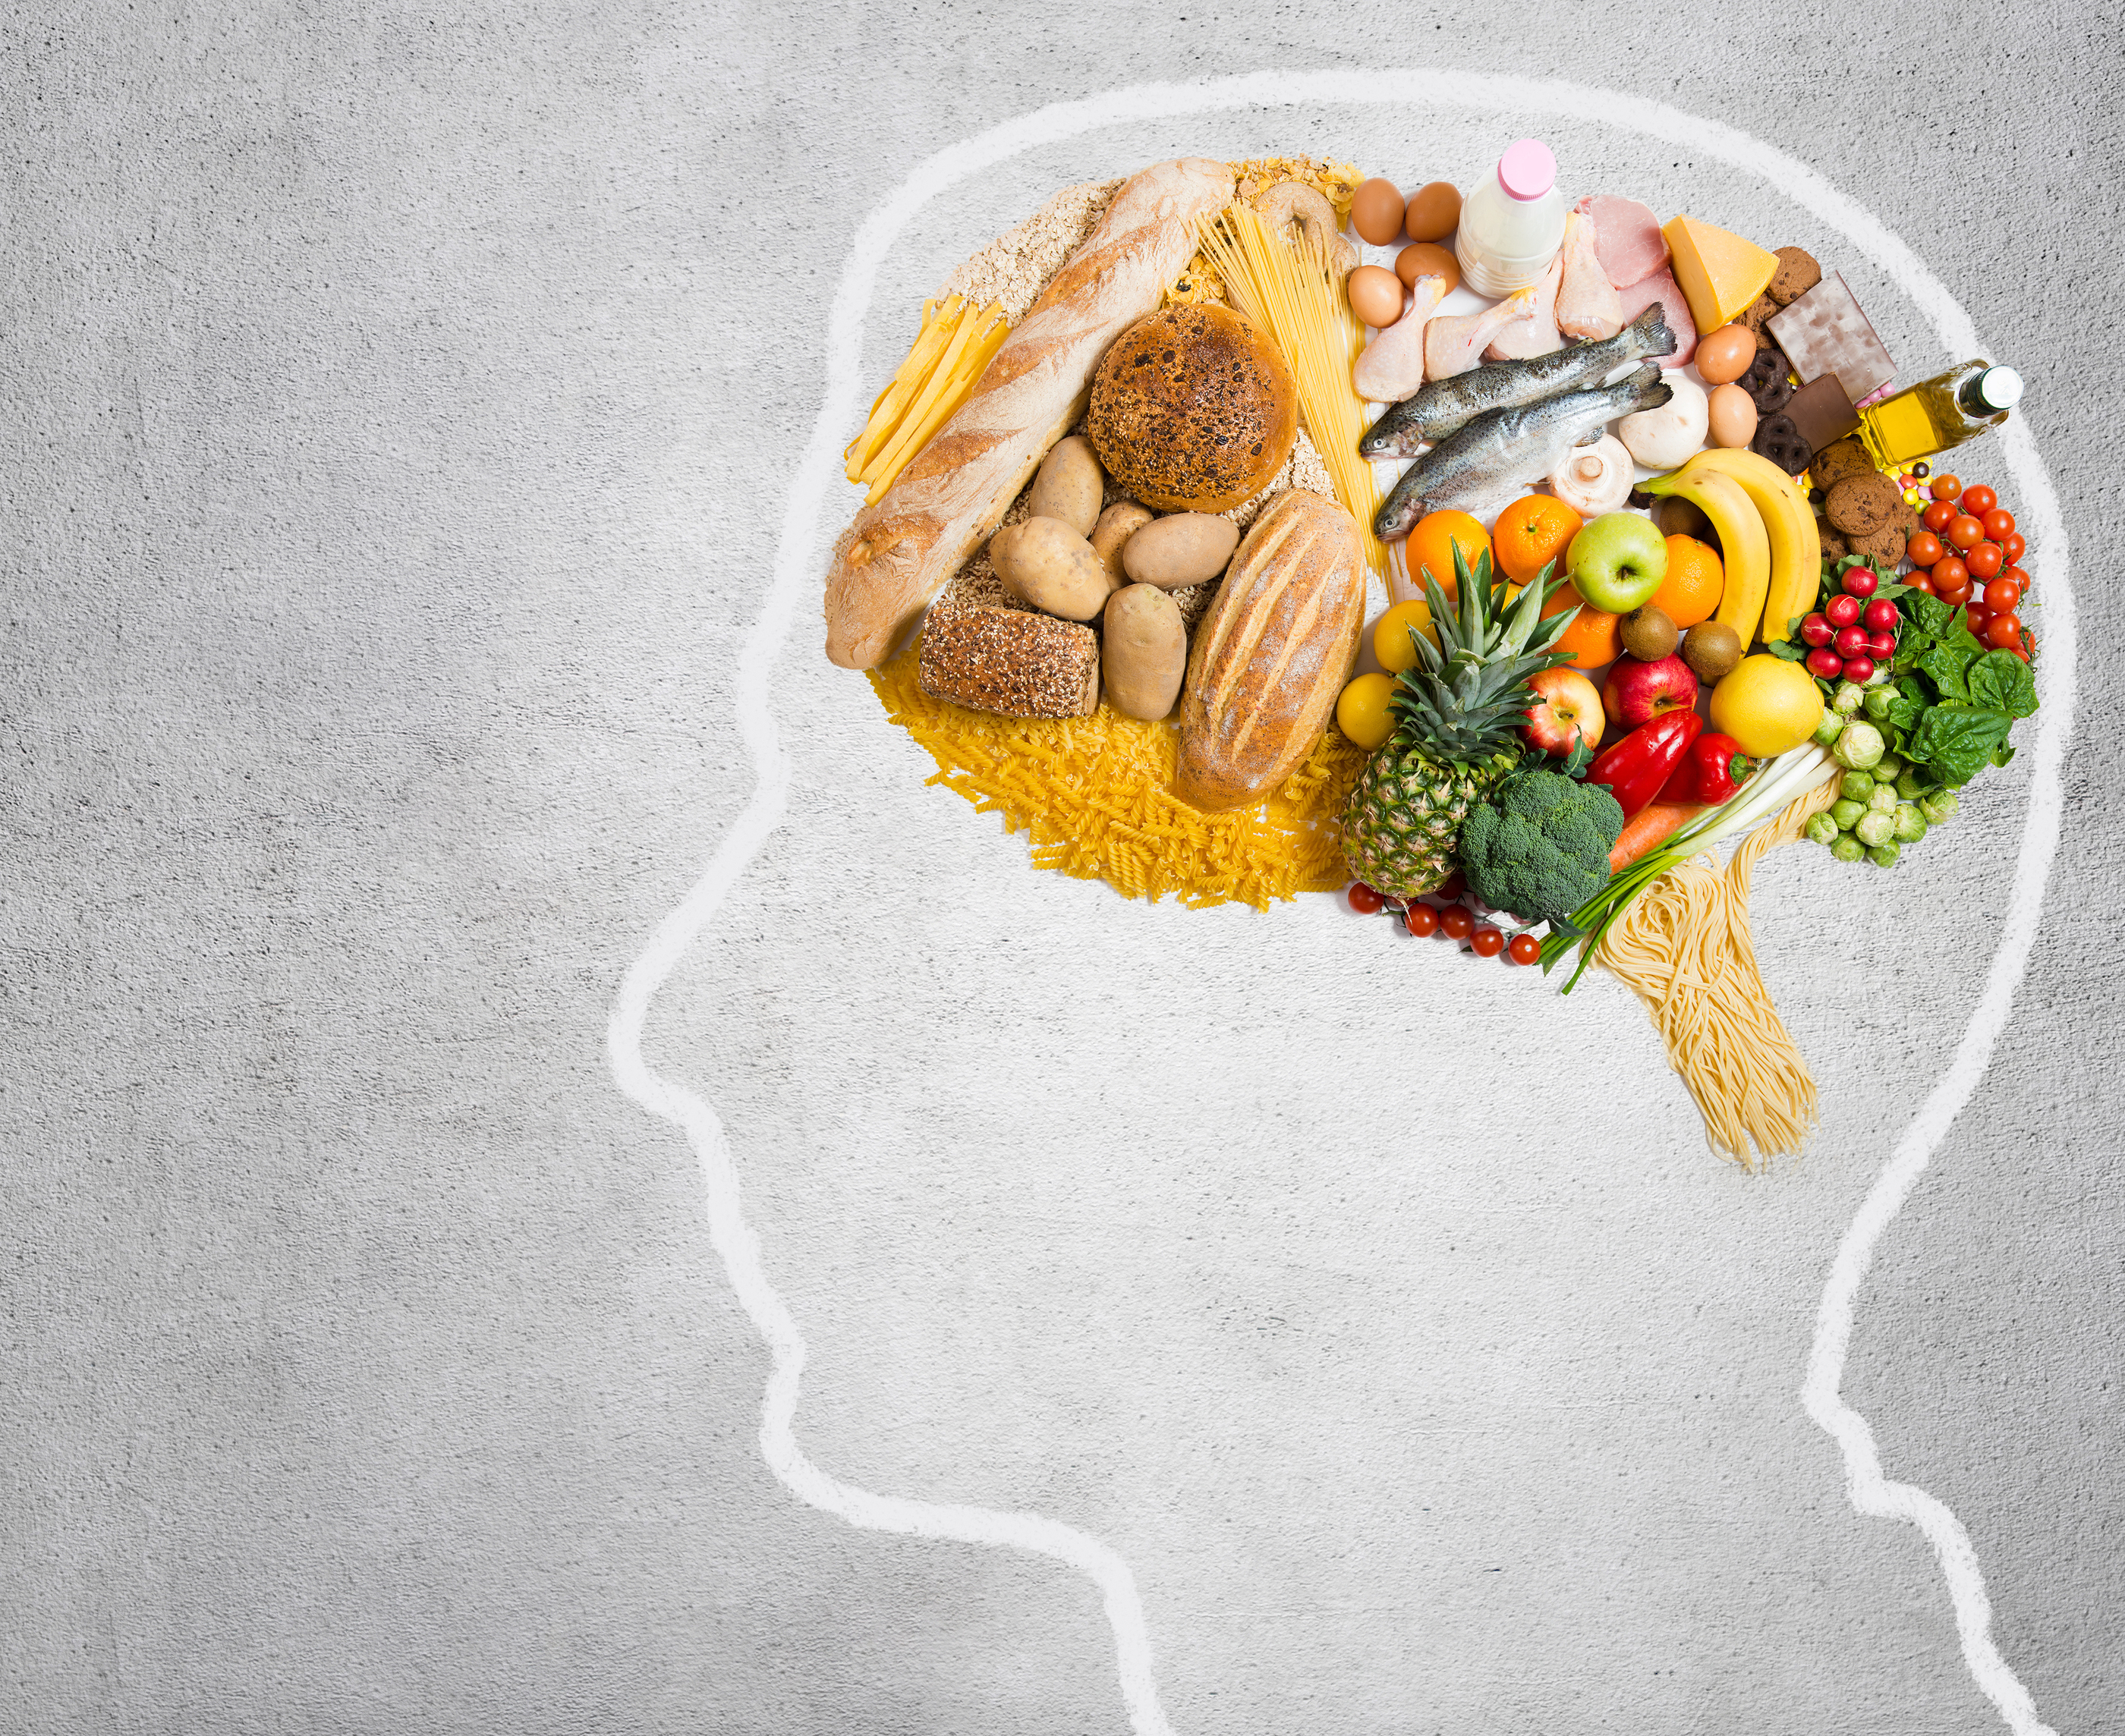 Mood Disorders and Food has a Deep Connection